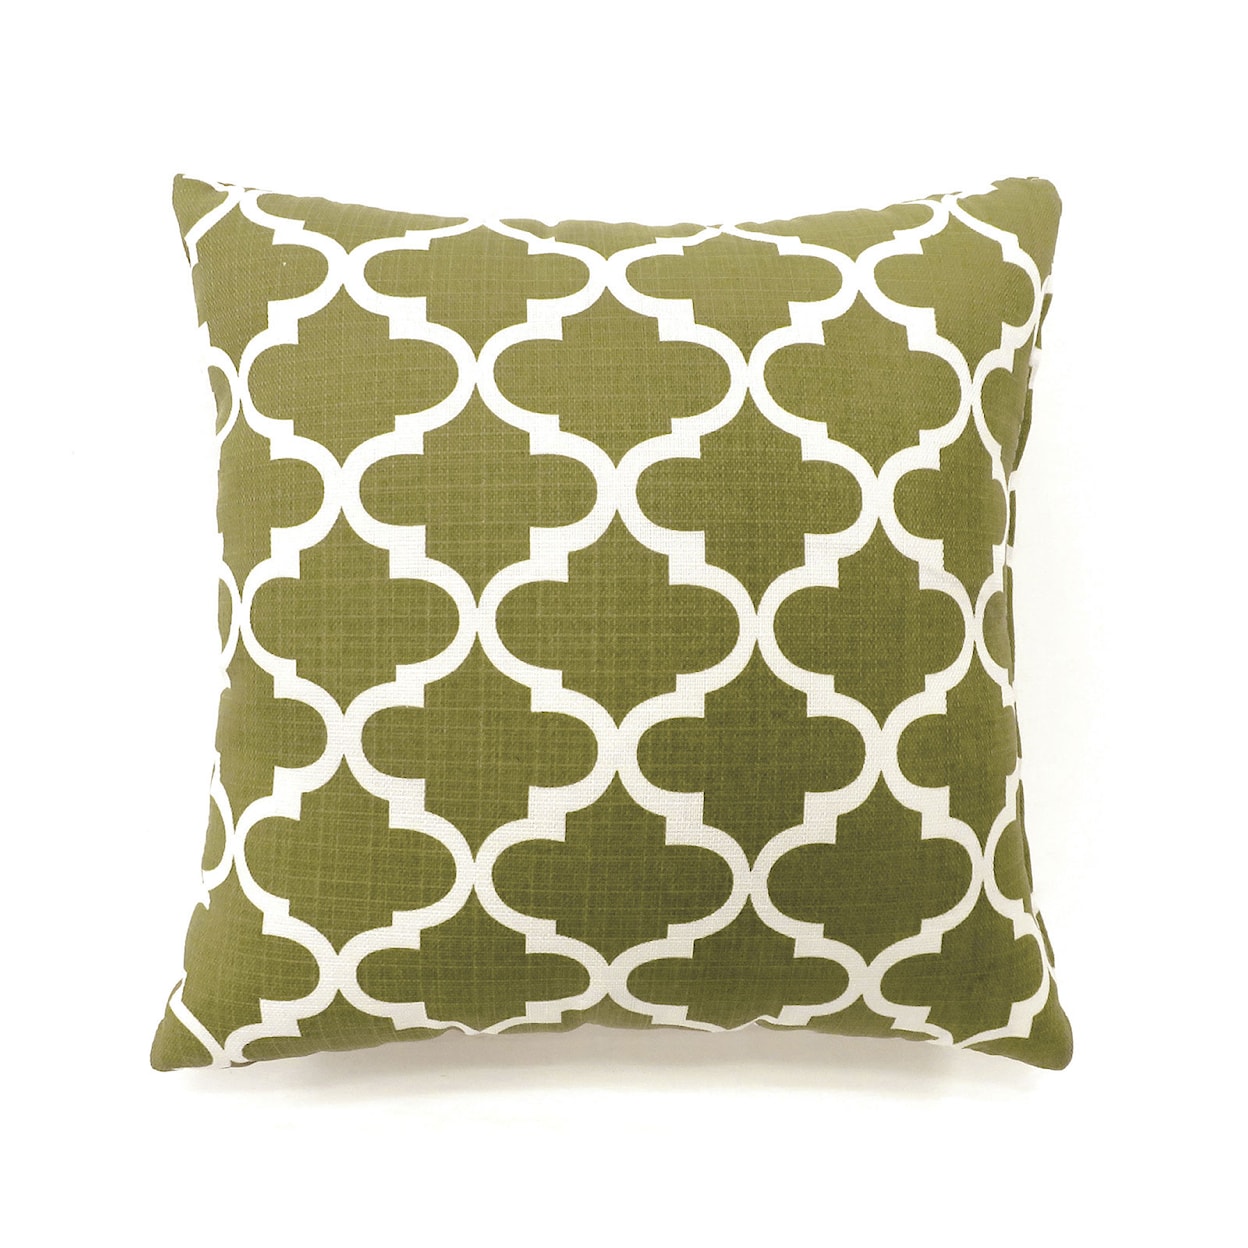 Furniture of America Xia Set of Two 18" X 18" Pillows, Green